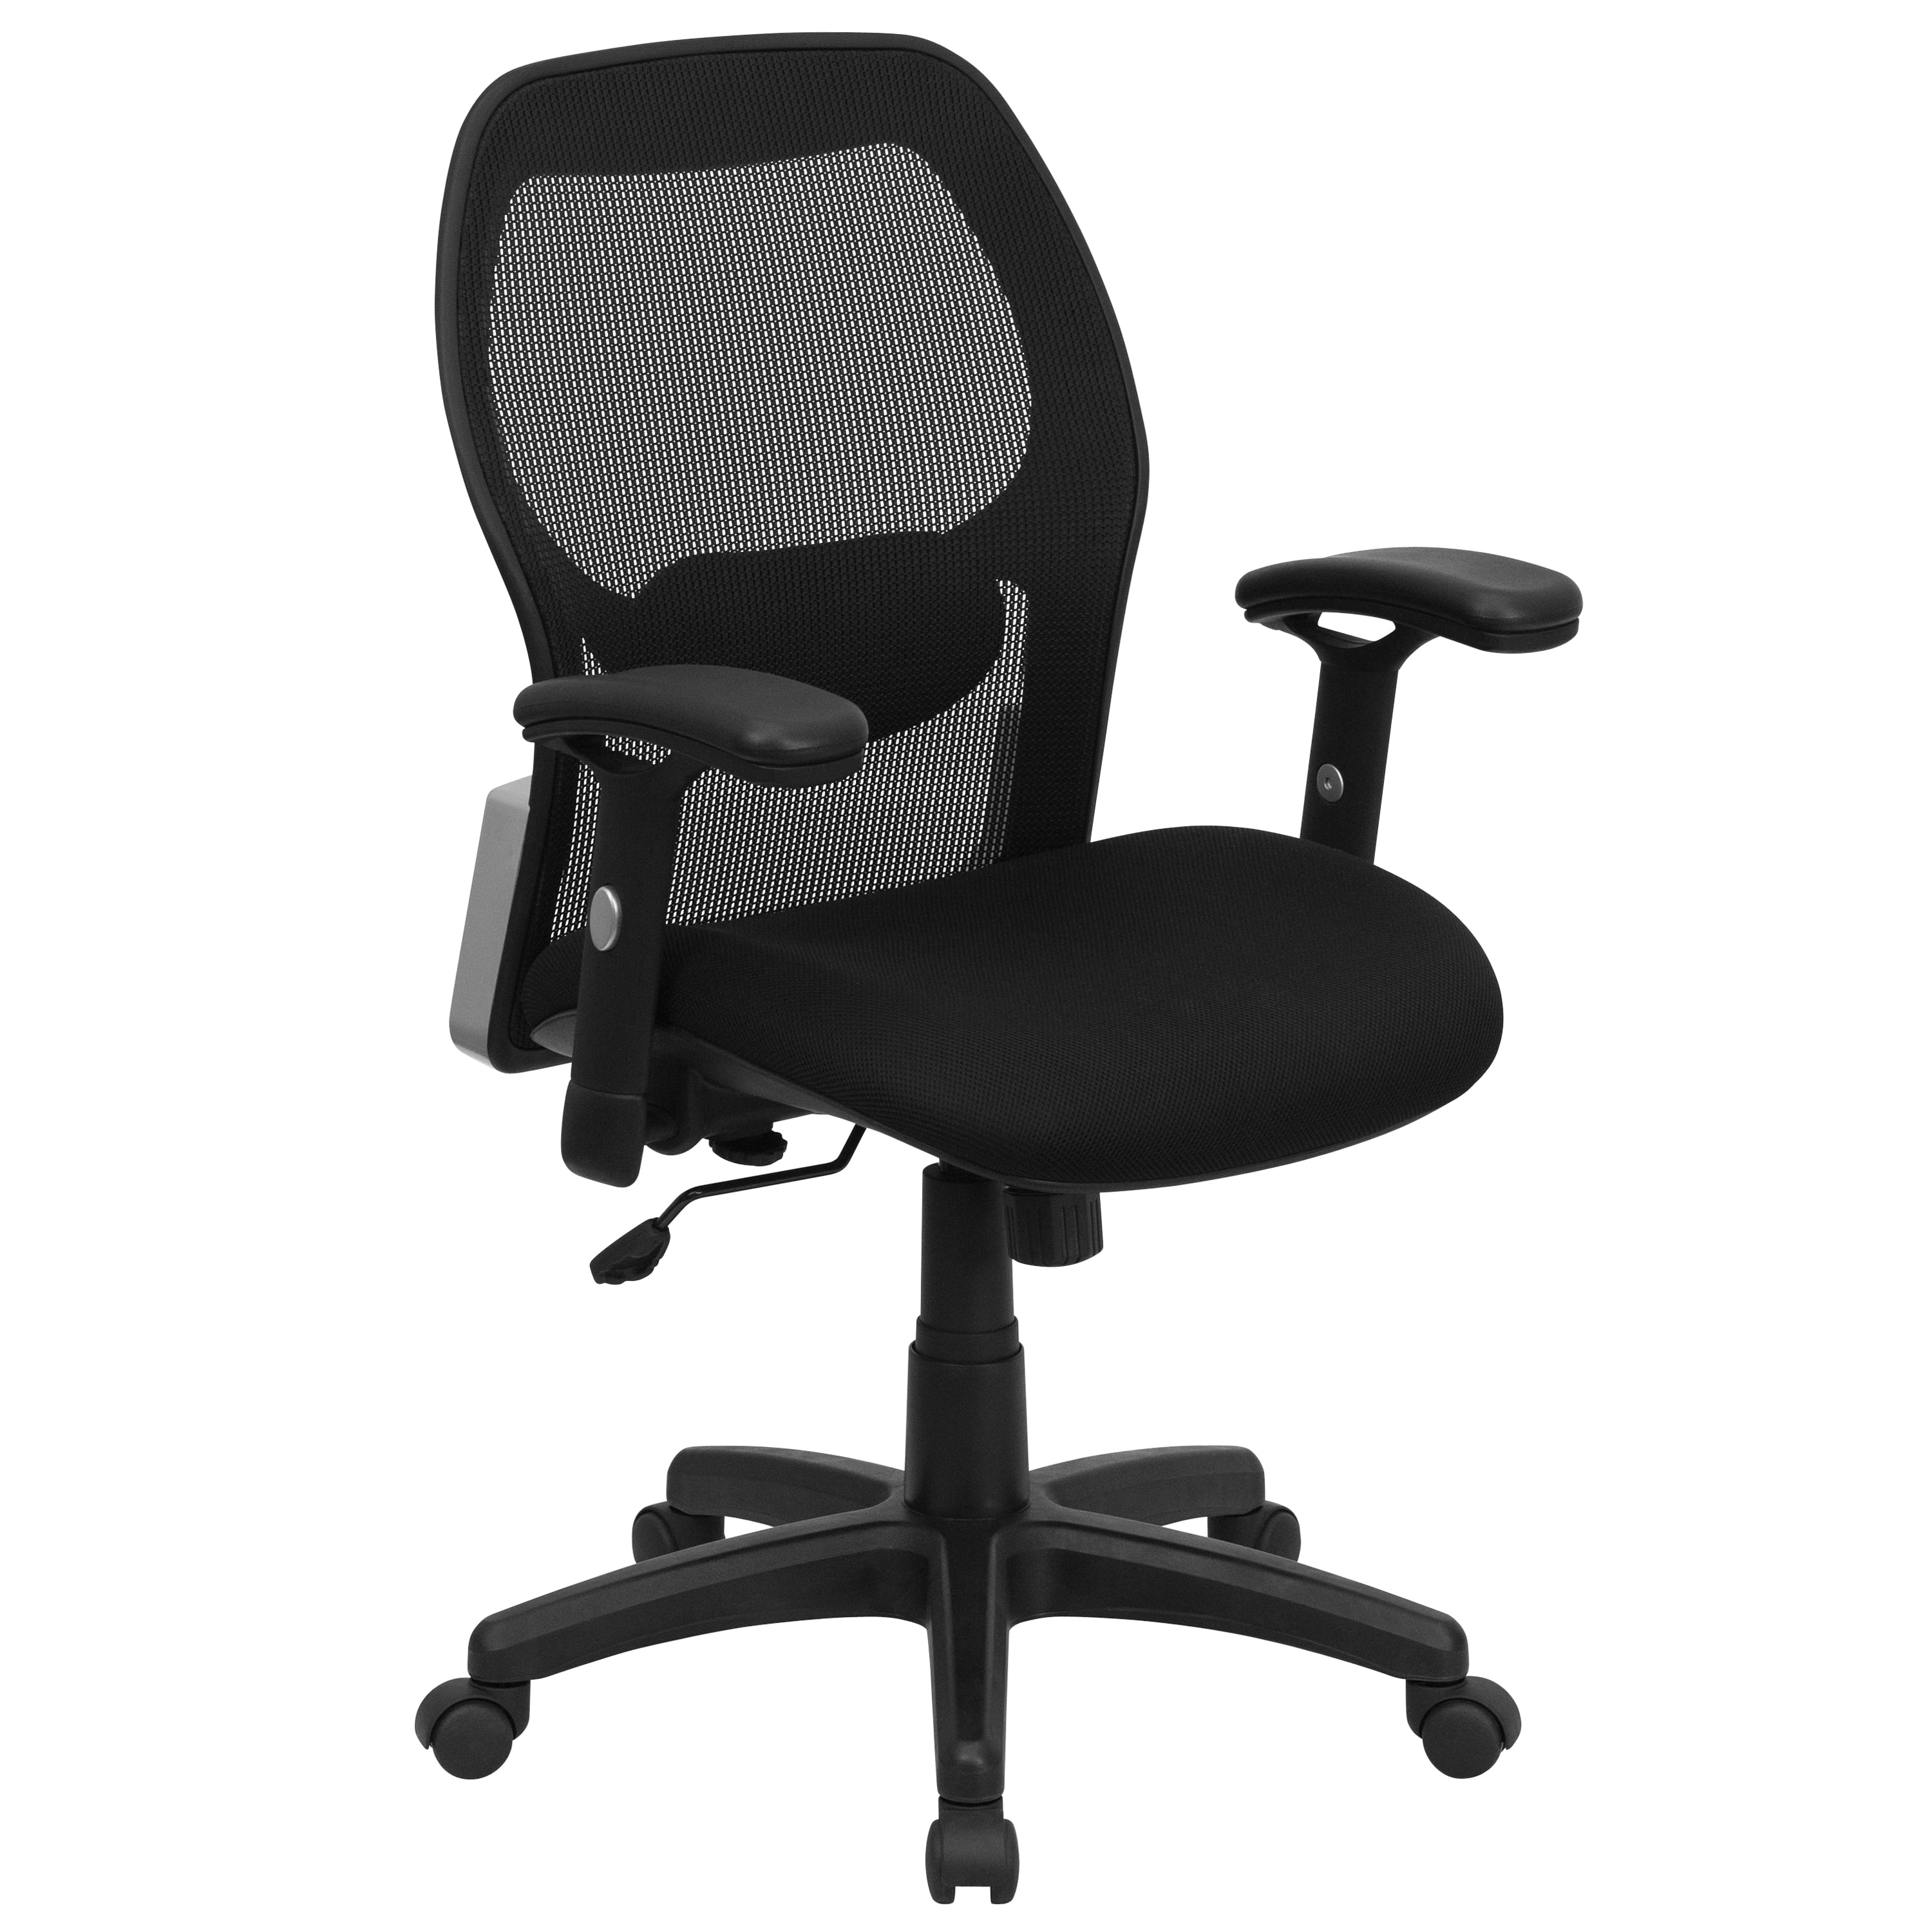 OFM 105-805 Superchair Task Chair with Black Fabric 